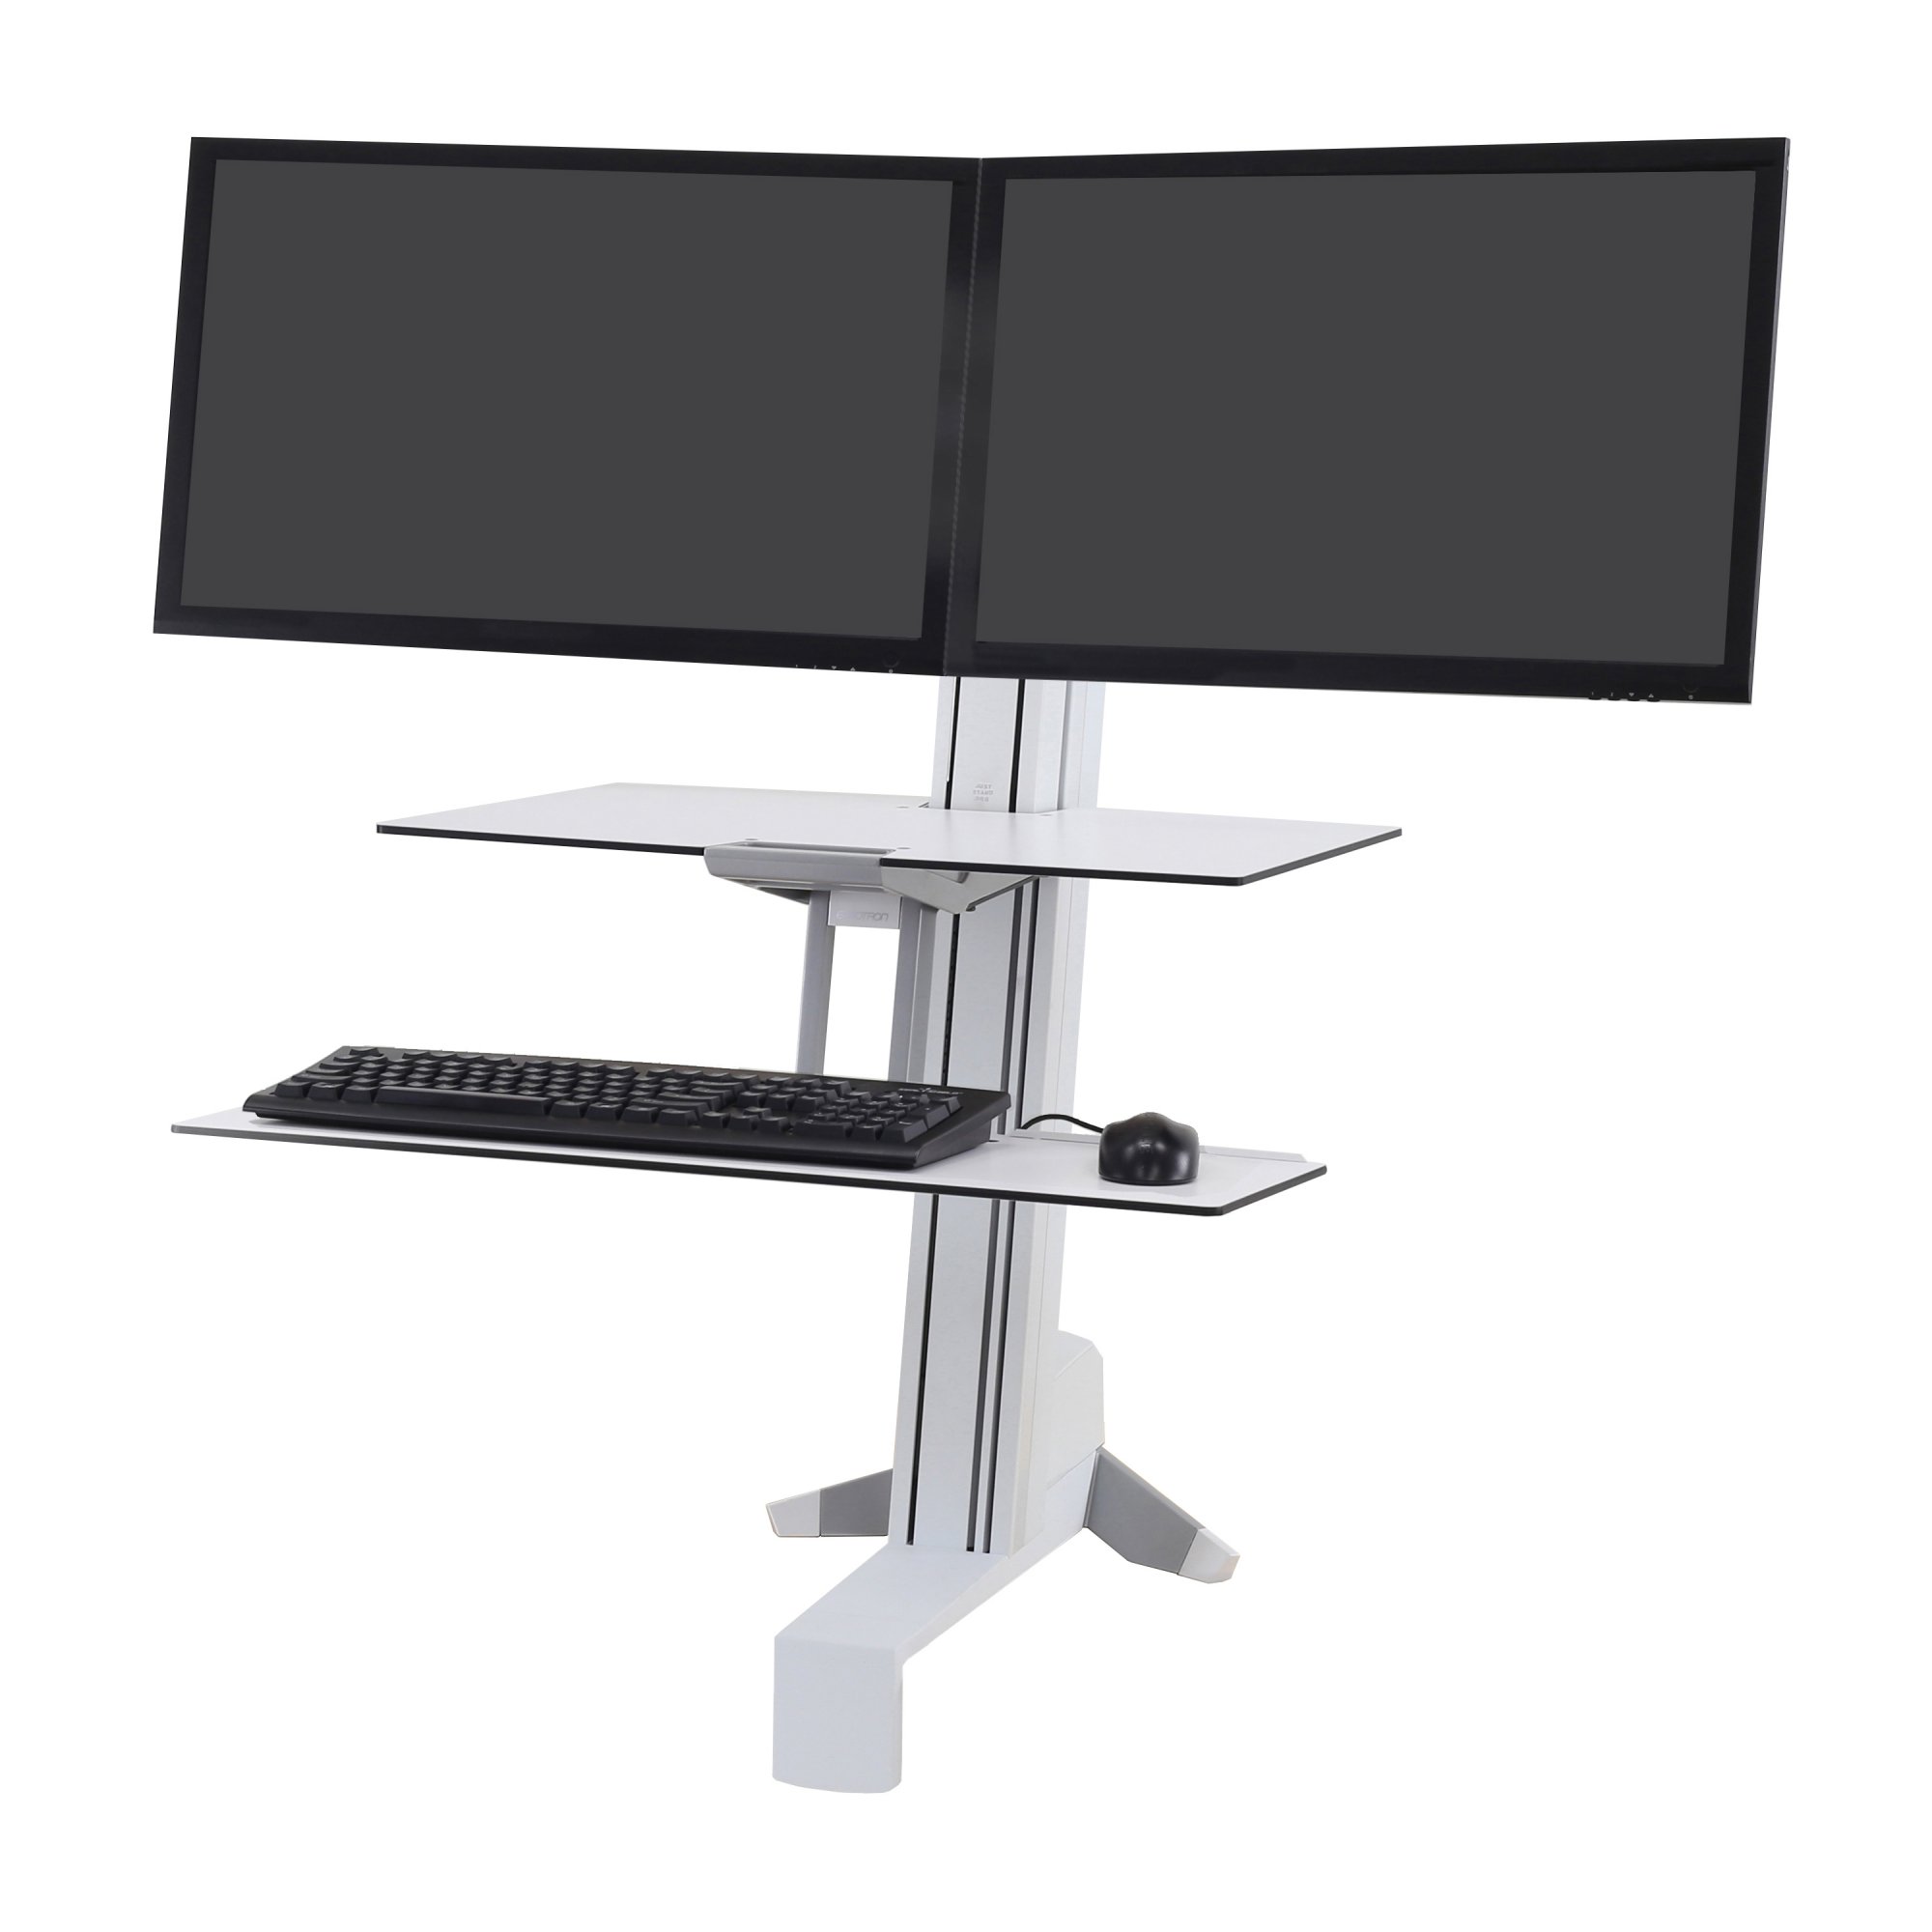 Ergotron 33-349-211 WorkFit-S, Dual Monitor with Worksurface